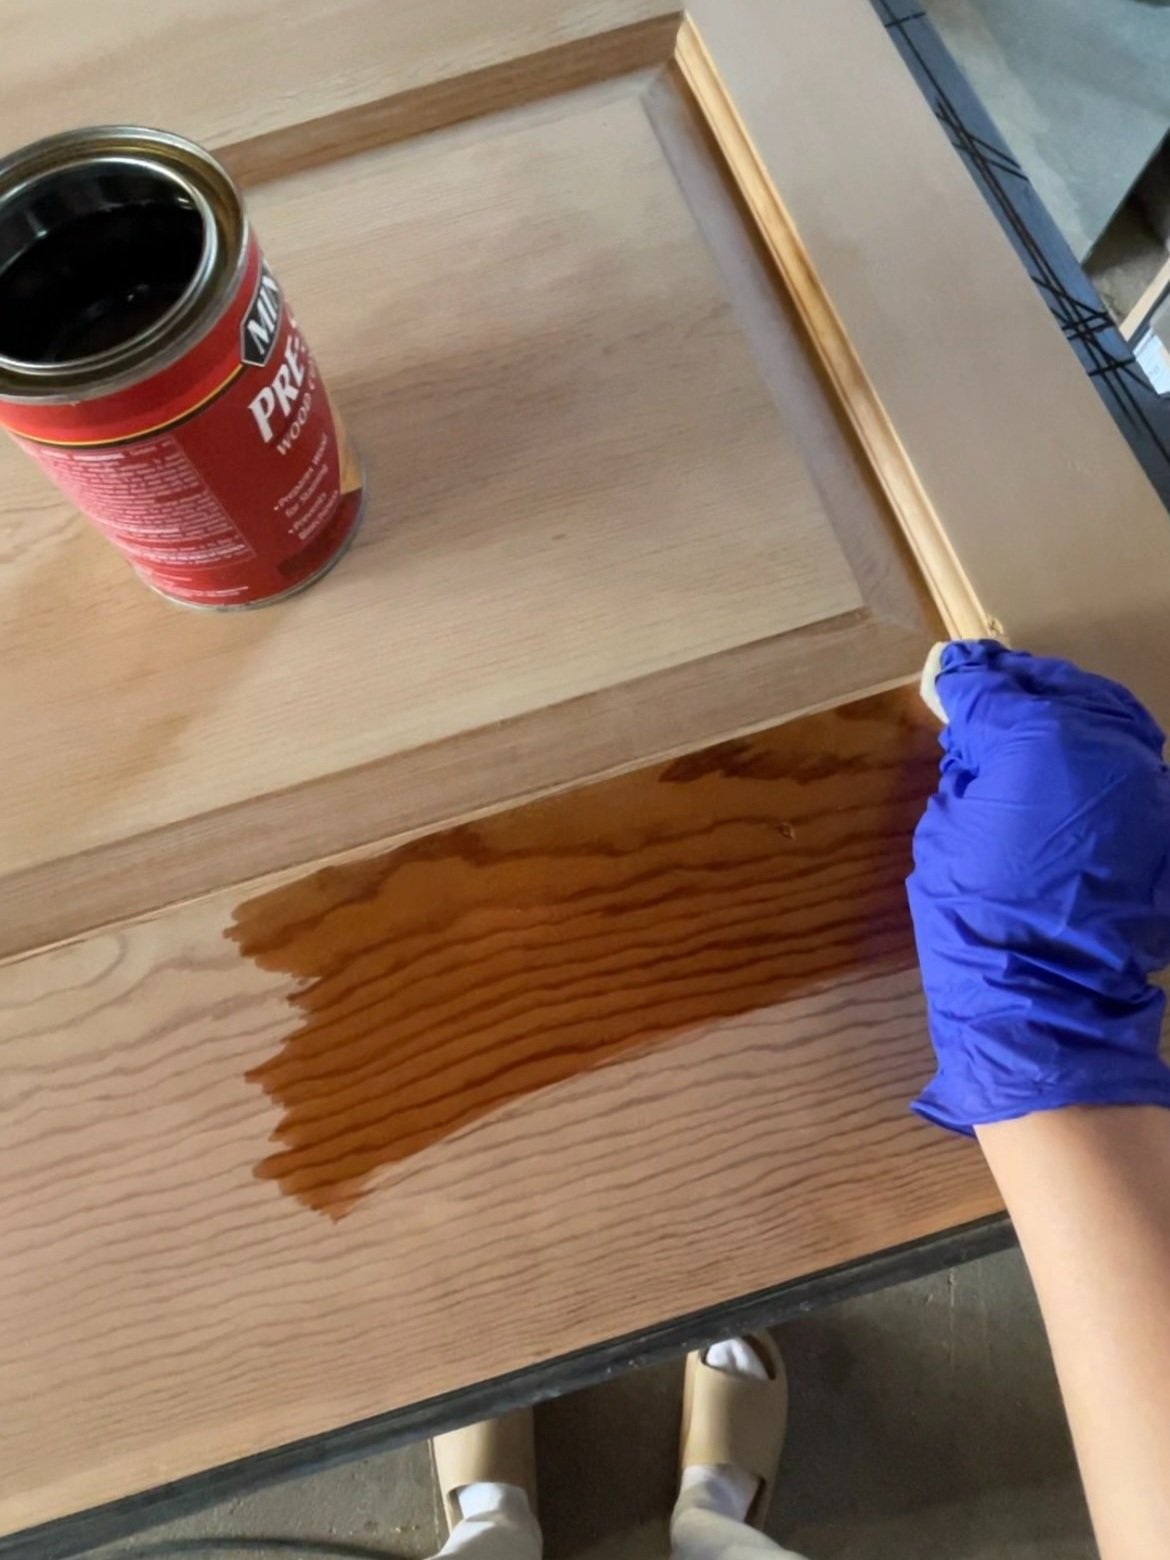 How to salvage & refinish an old wood exterior door - Nadine Stay. How to sand, stain, and seal an exterior wood door. How to protect a wood door from weather, rain, moisture, and color fading. How to refinish a wood door like a professional